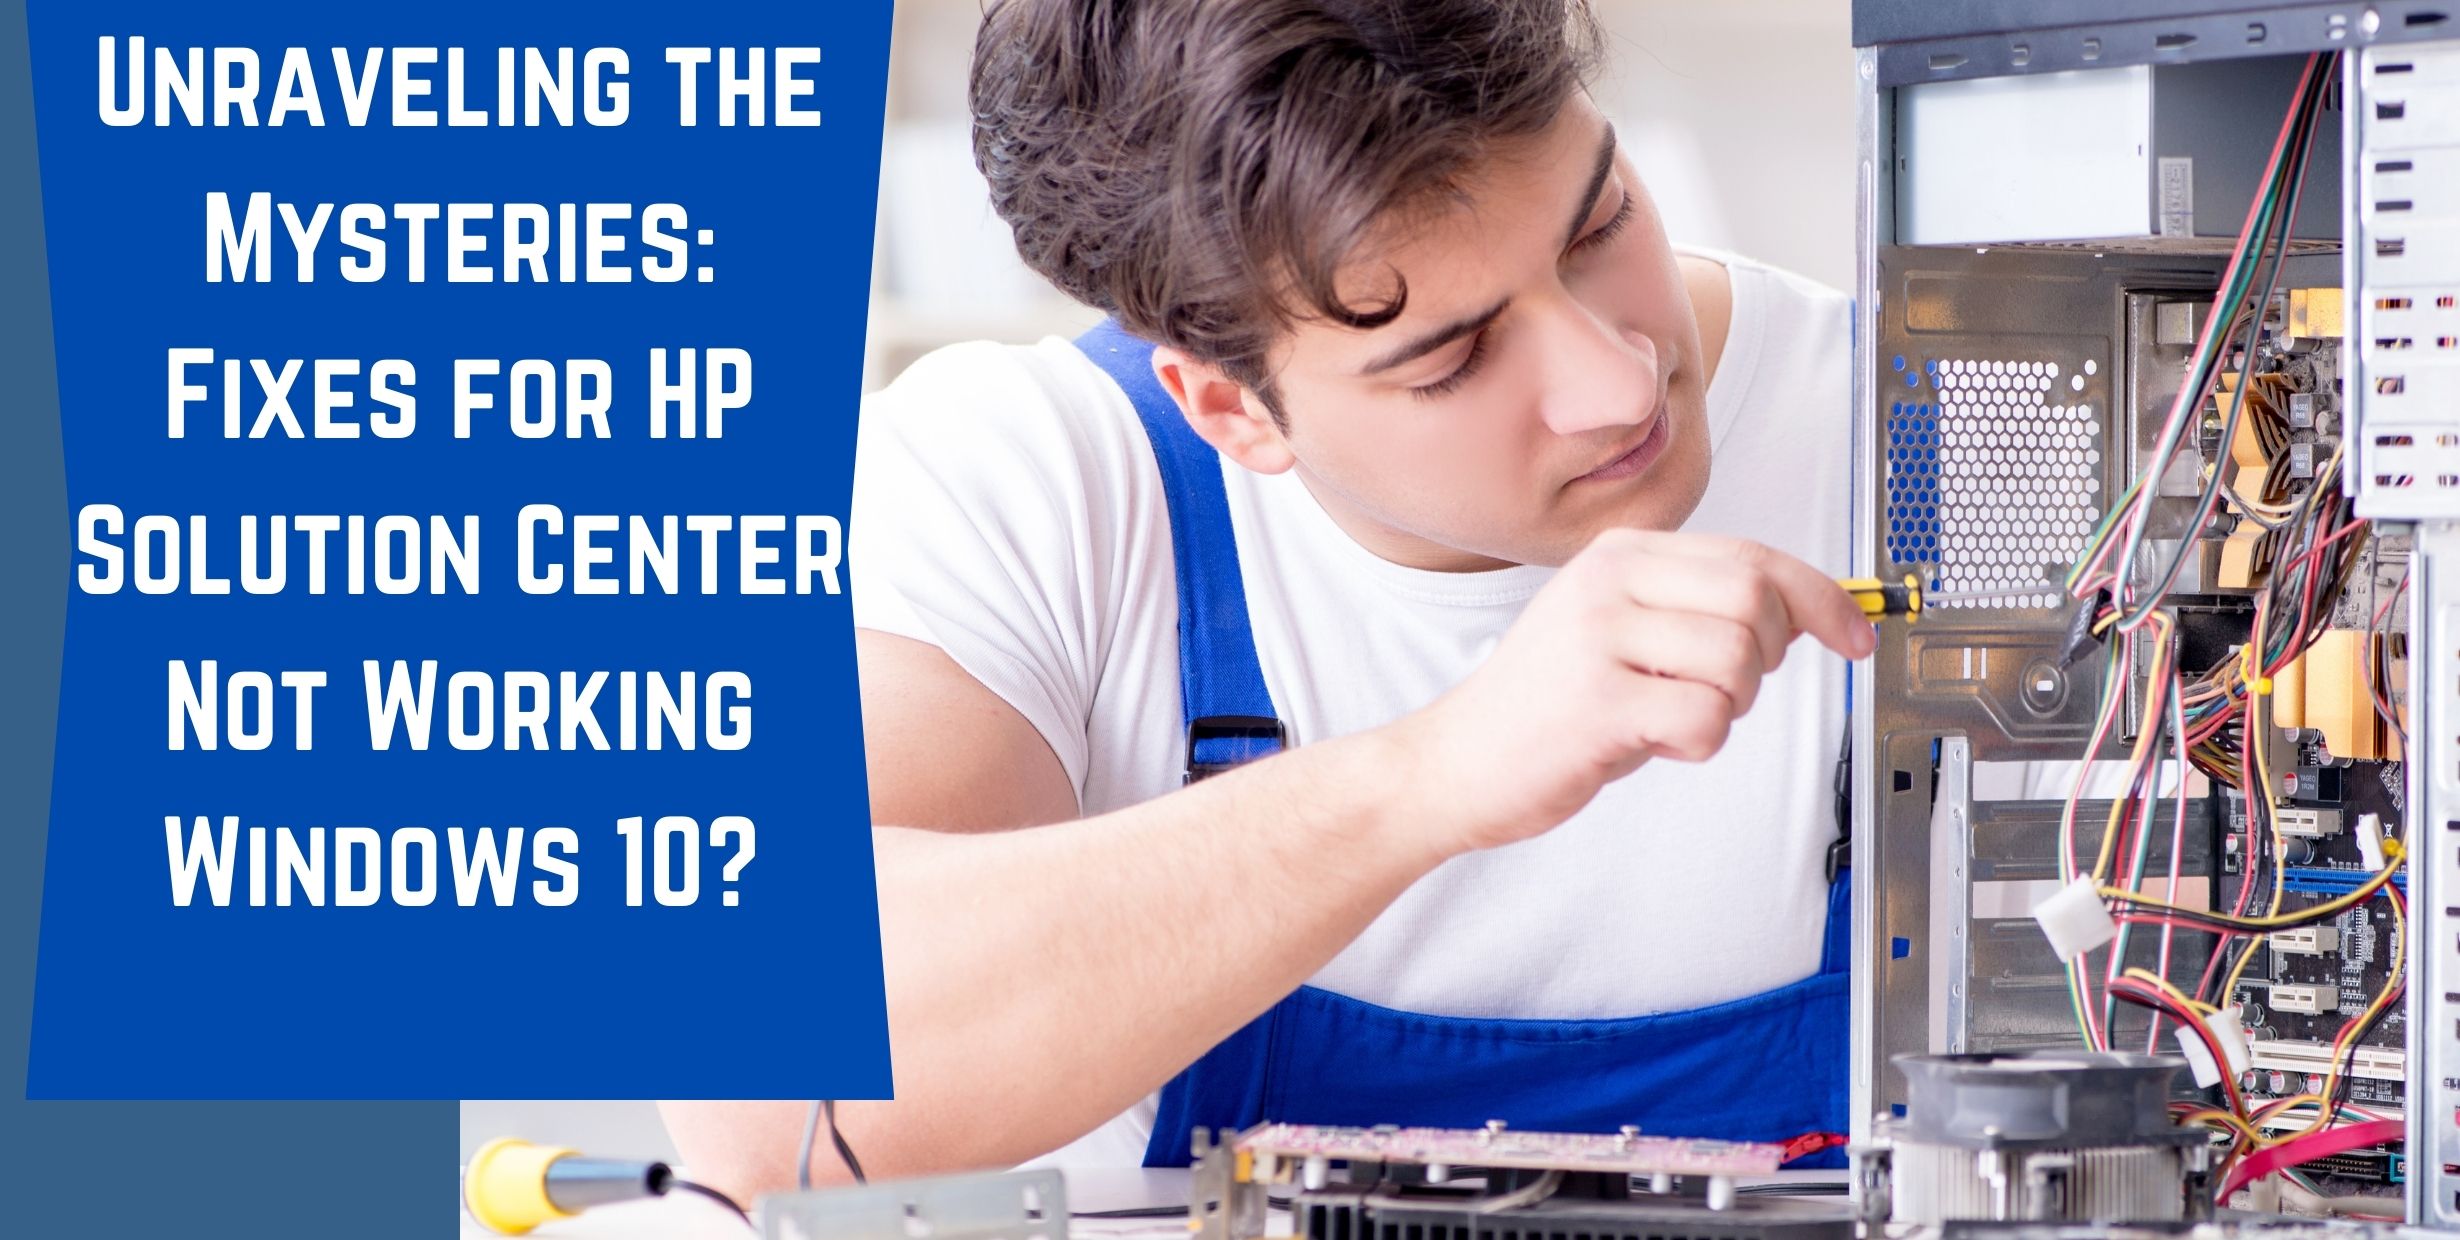 Unraveling the Mysteries_ Fixes for HP Solution Center Not Working Windows 10